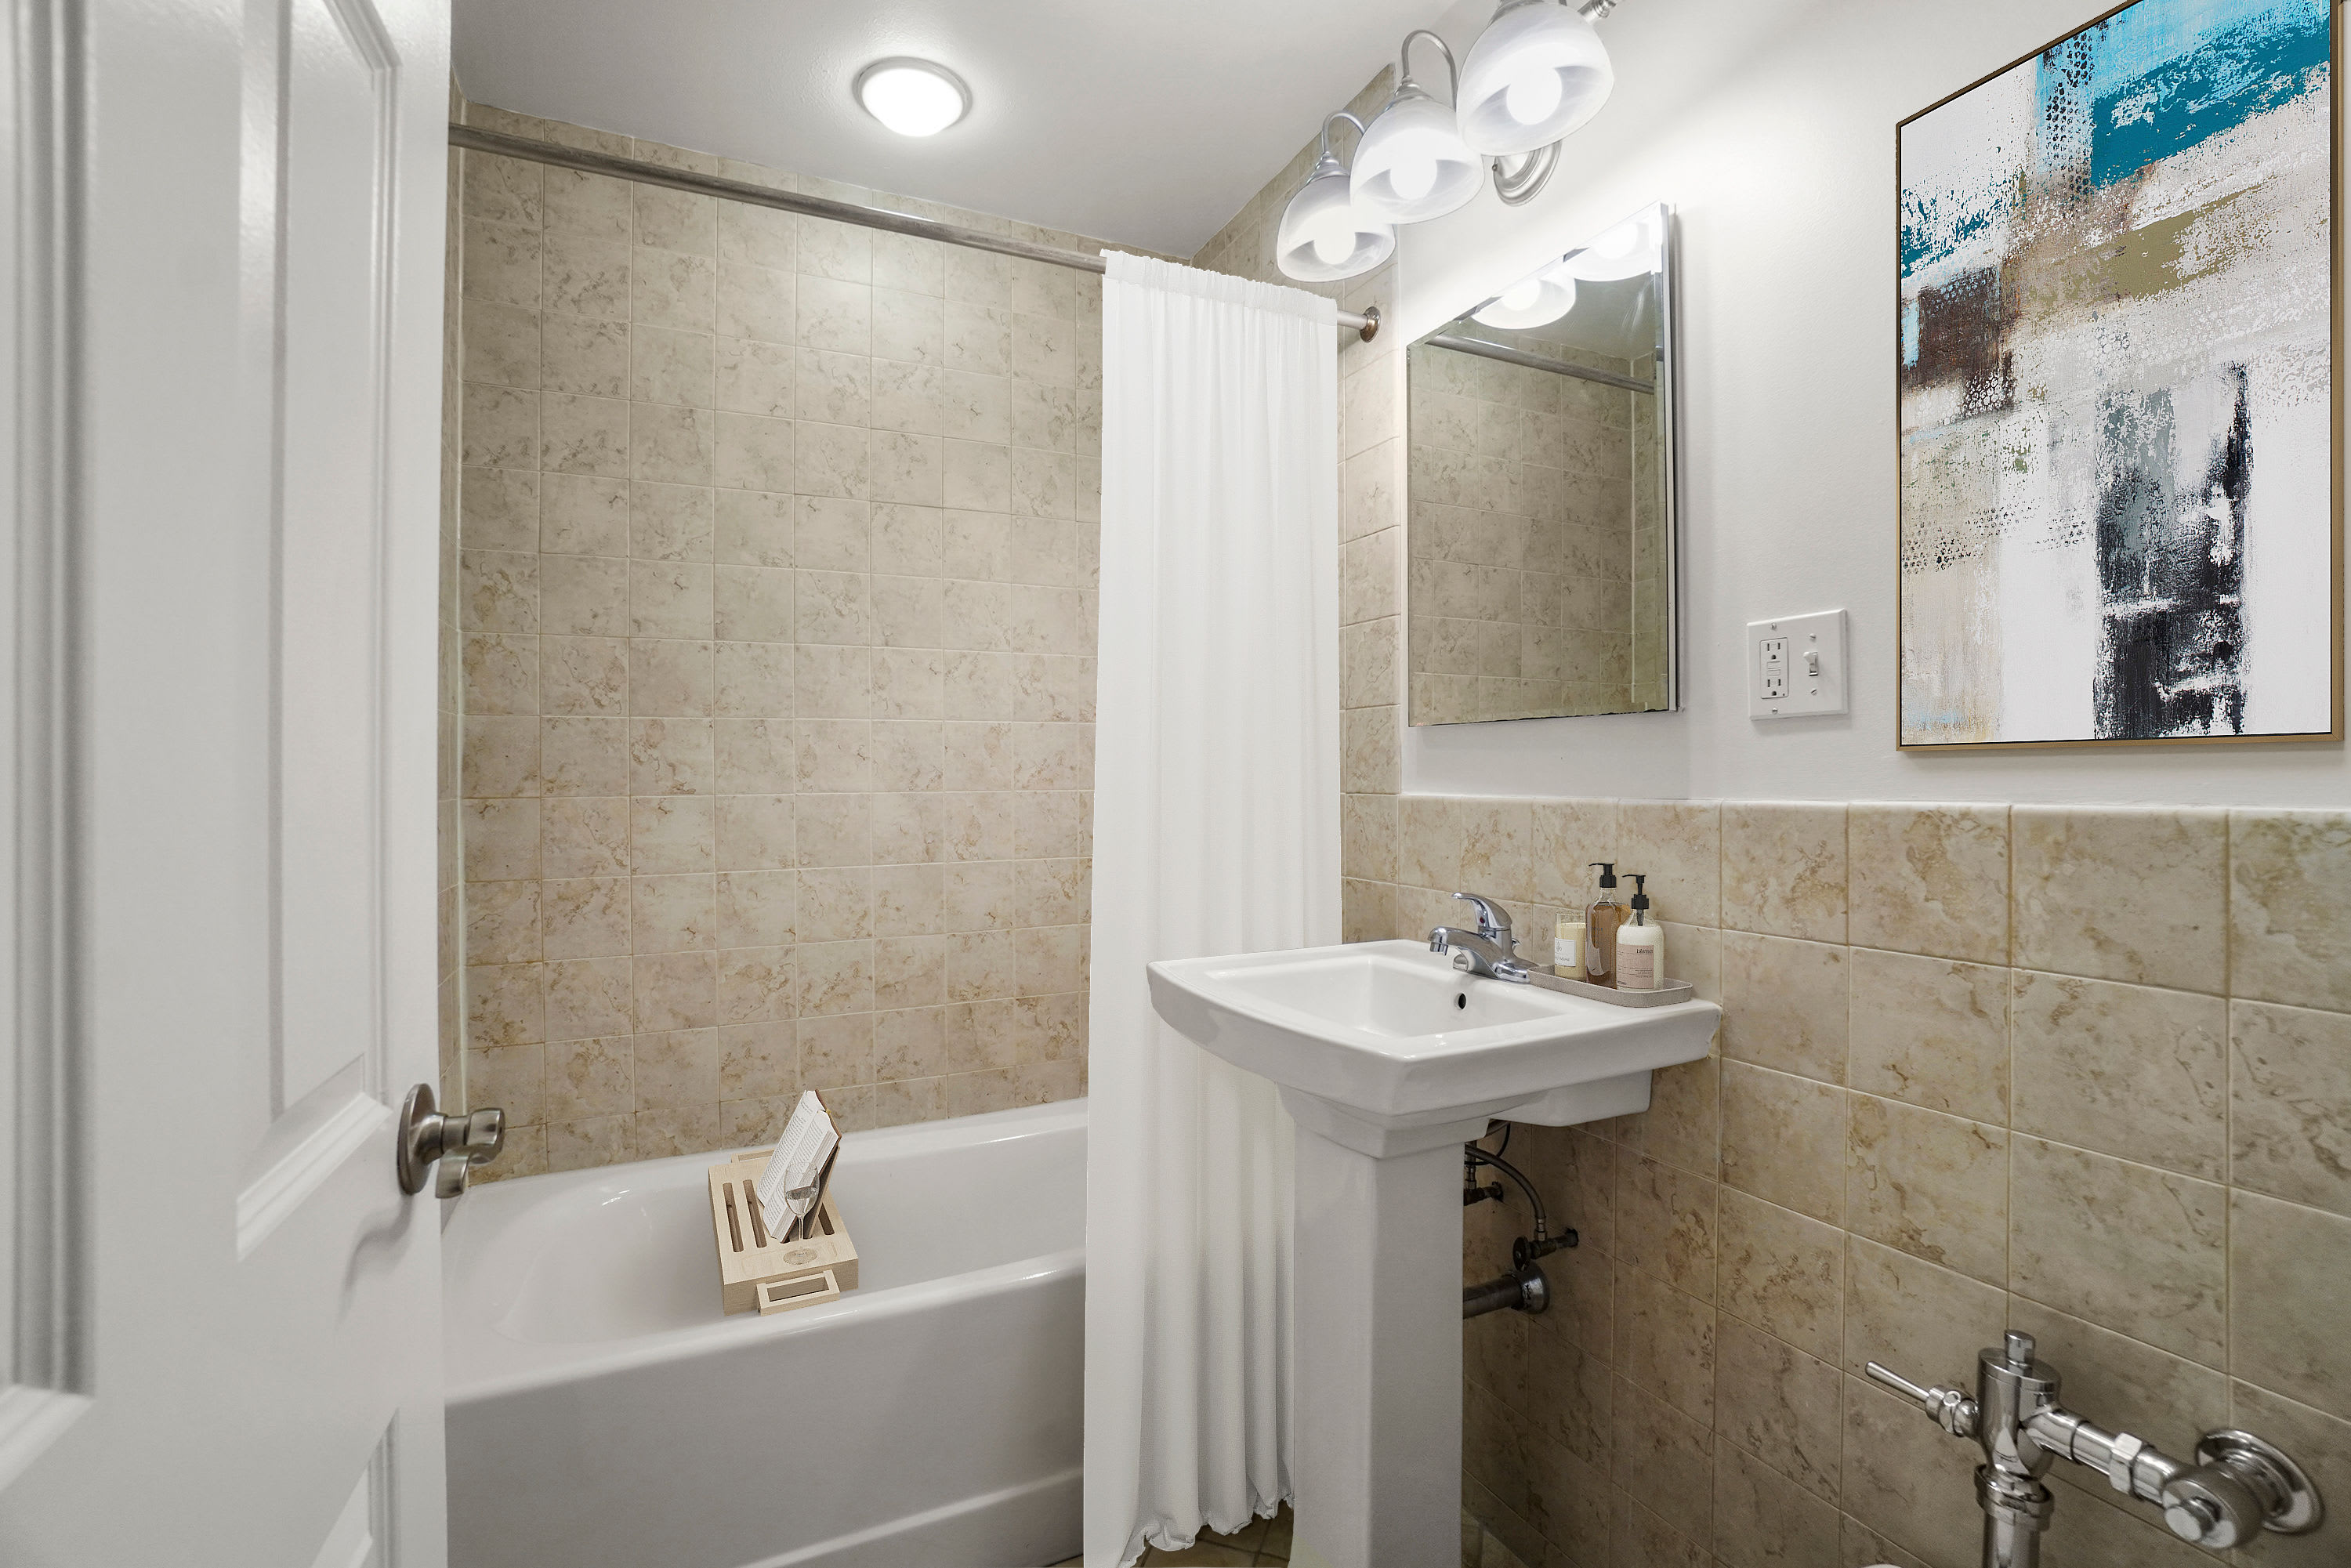 Camelot Court offers a cozy bathroom in Brighton, Massachusetts